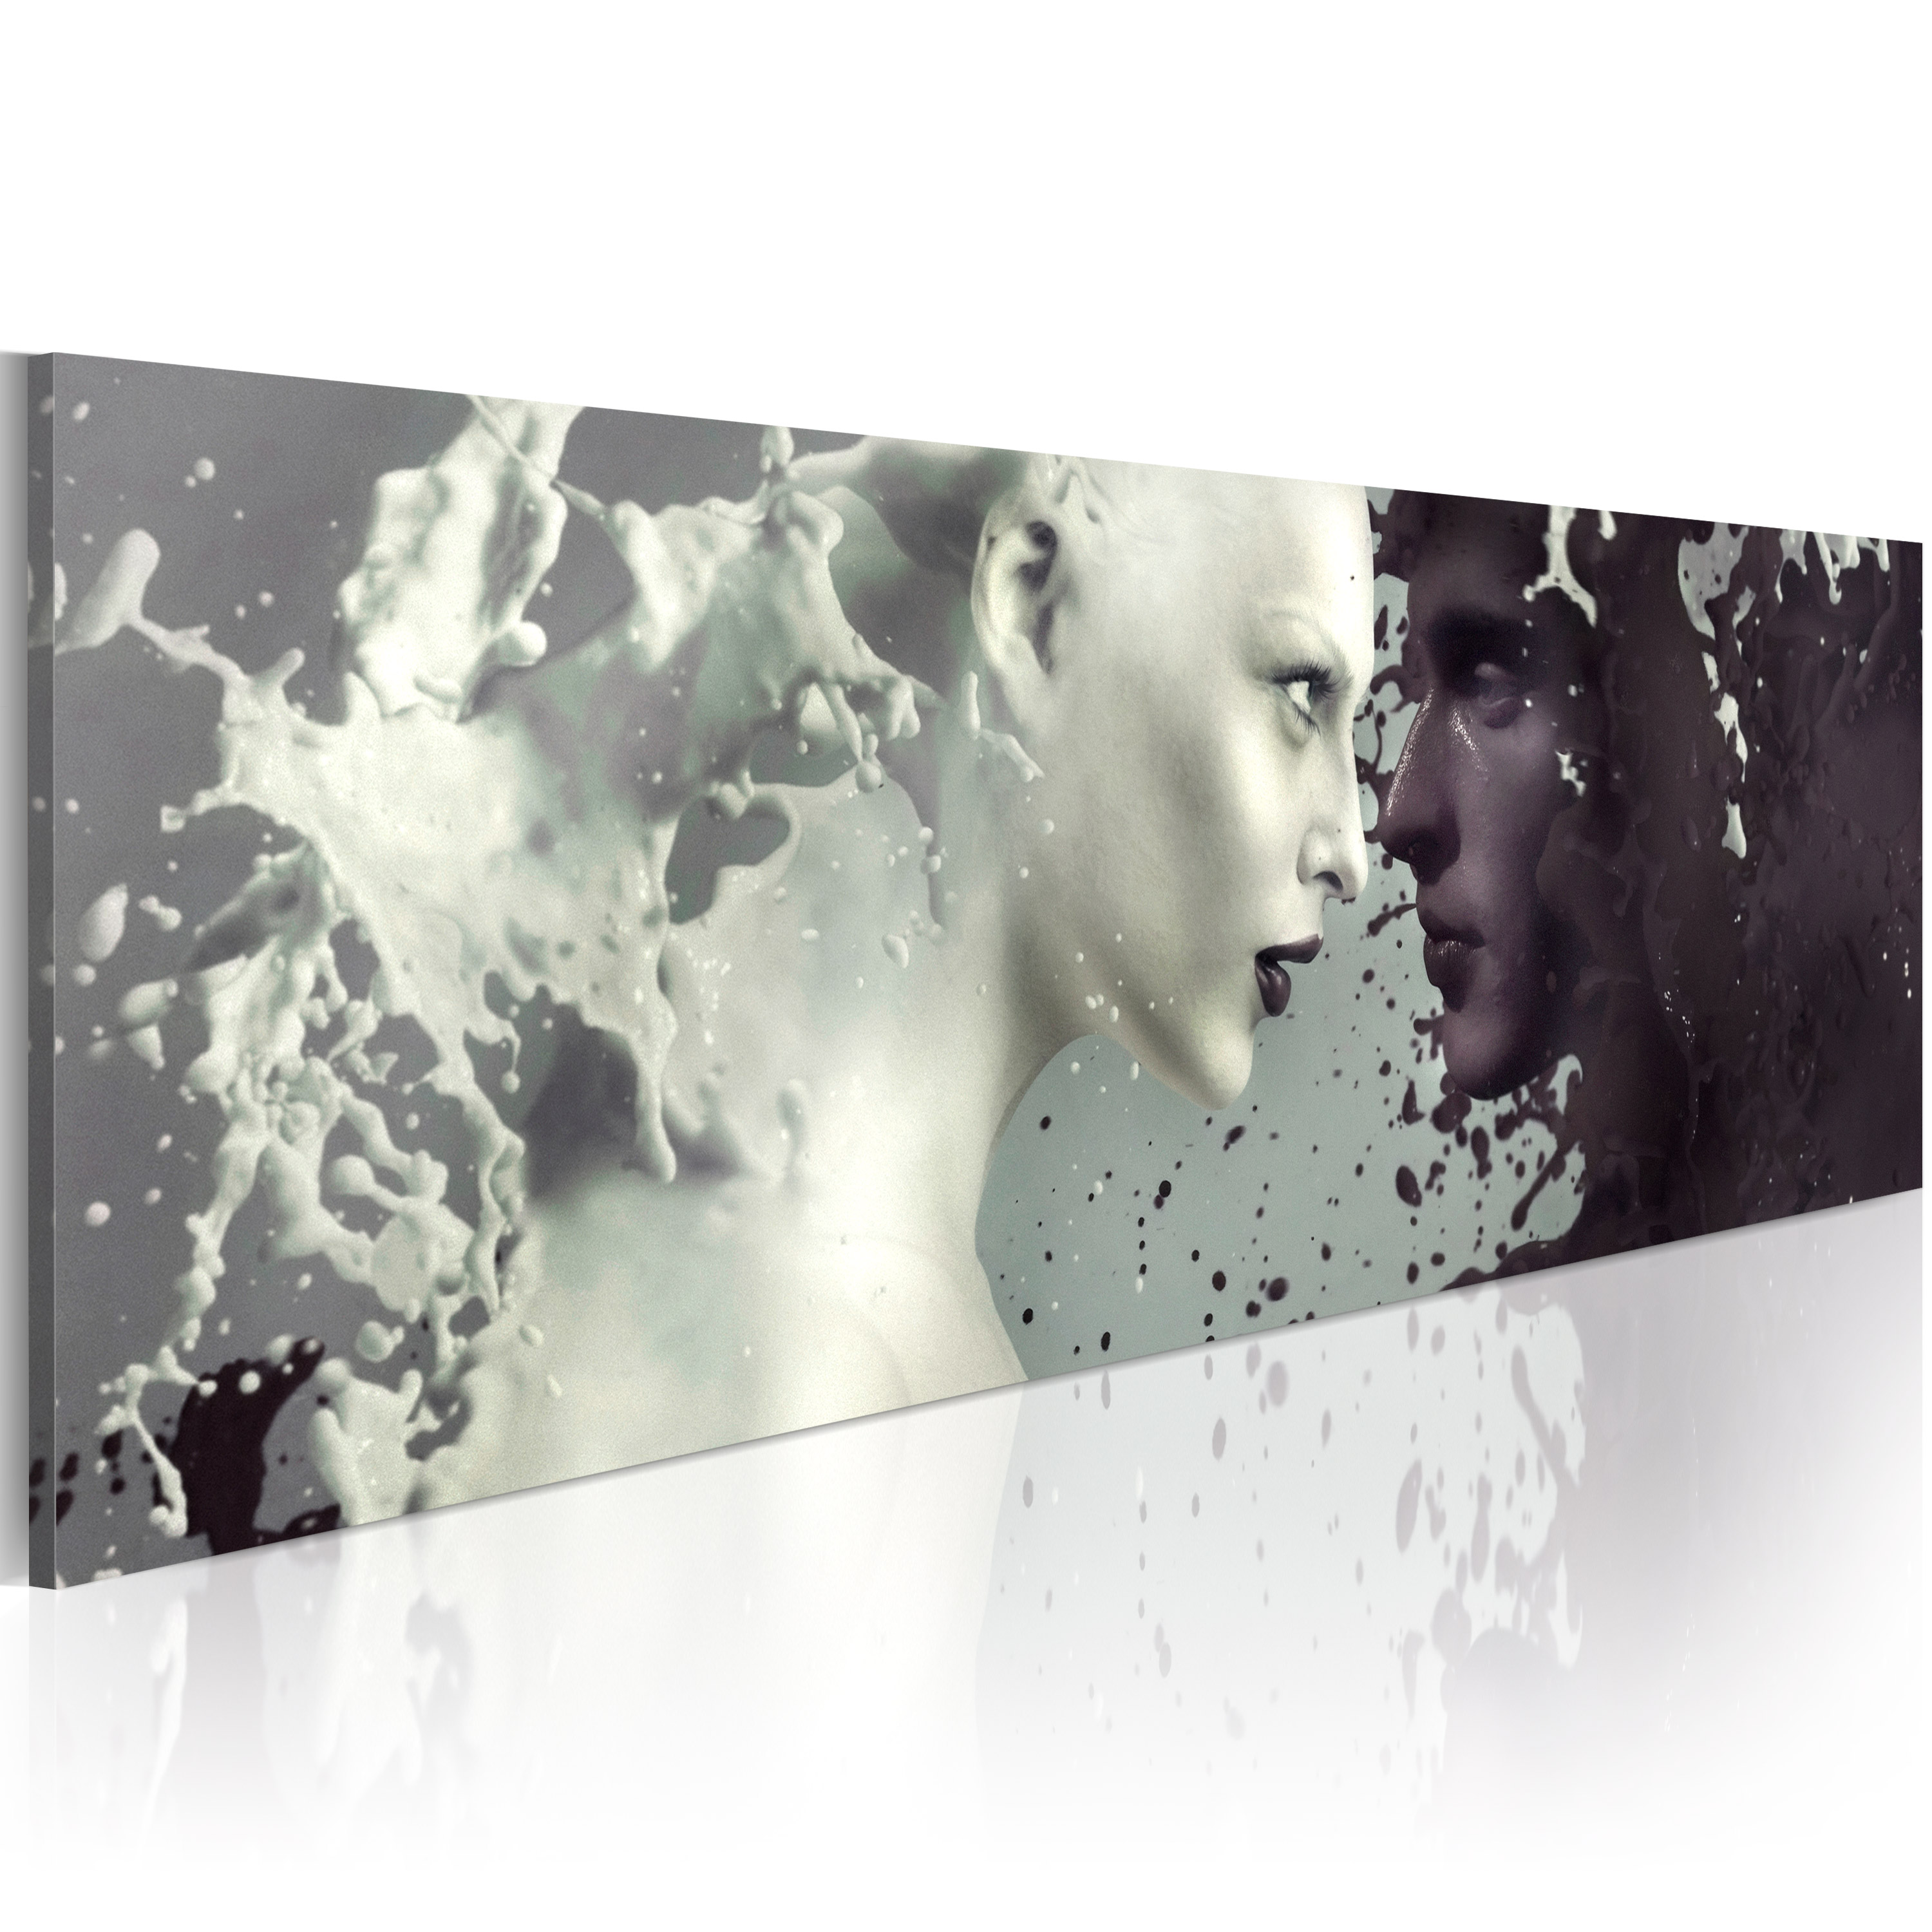 Canvas Print - Demons in your eyes... - 120x40